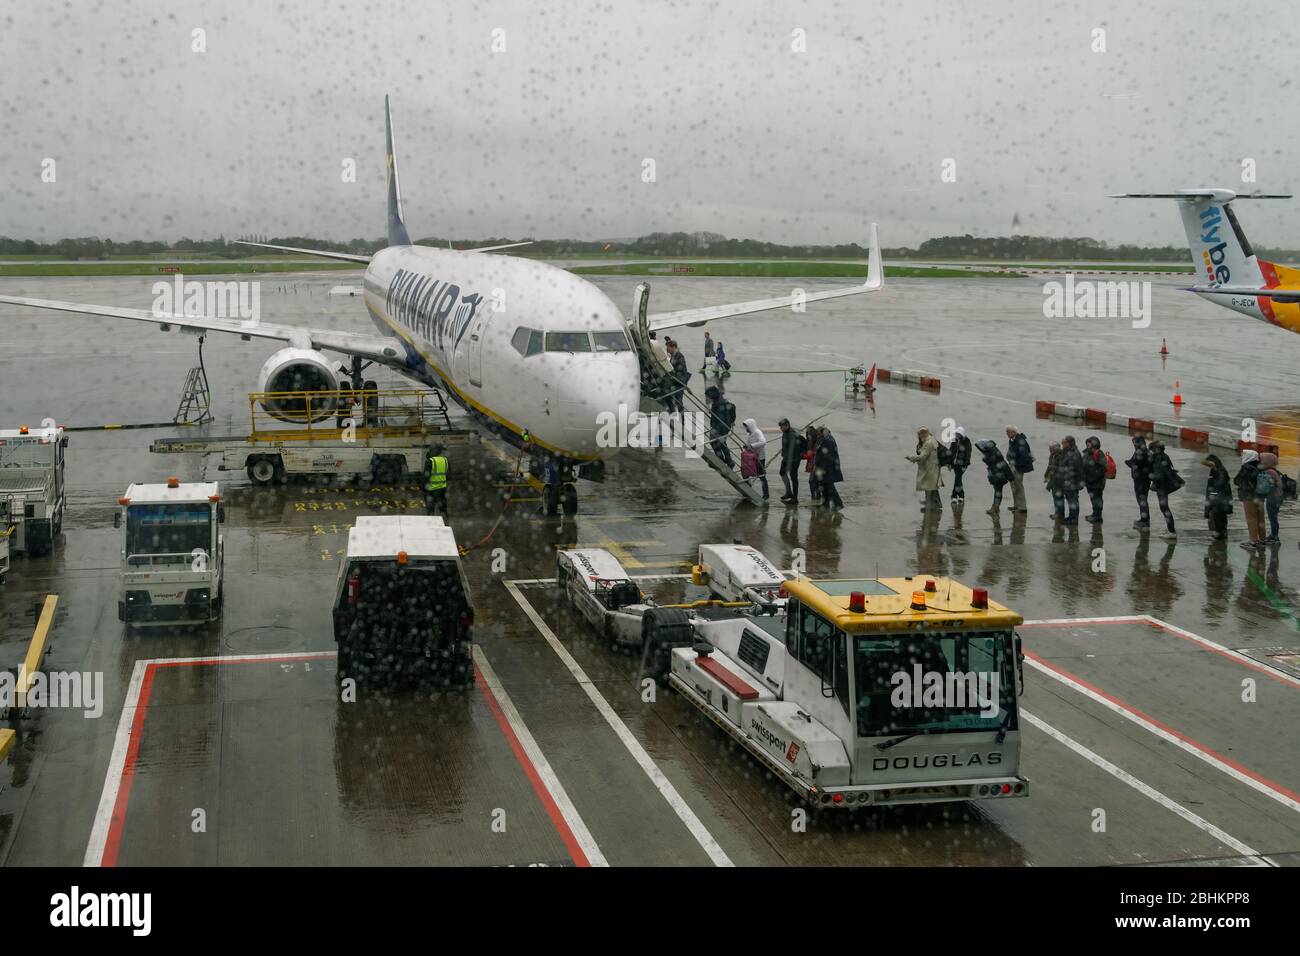 Manchester UK Ryanair aircraft with boarding passengers at airport tarmac. Rainy weather view of travelers at apron area entering a Boeing 737-800. Stock Photo